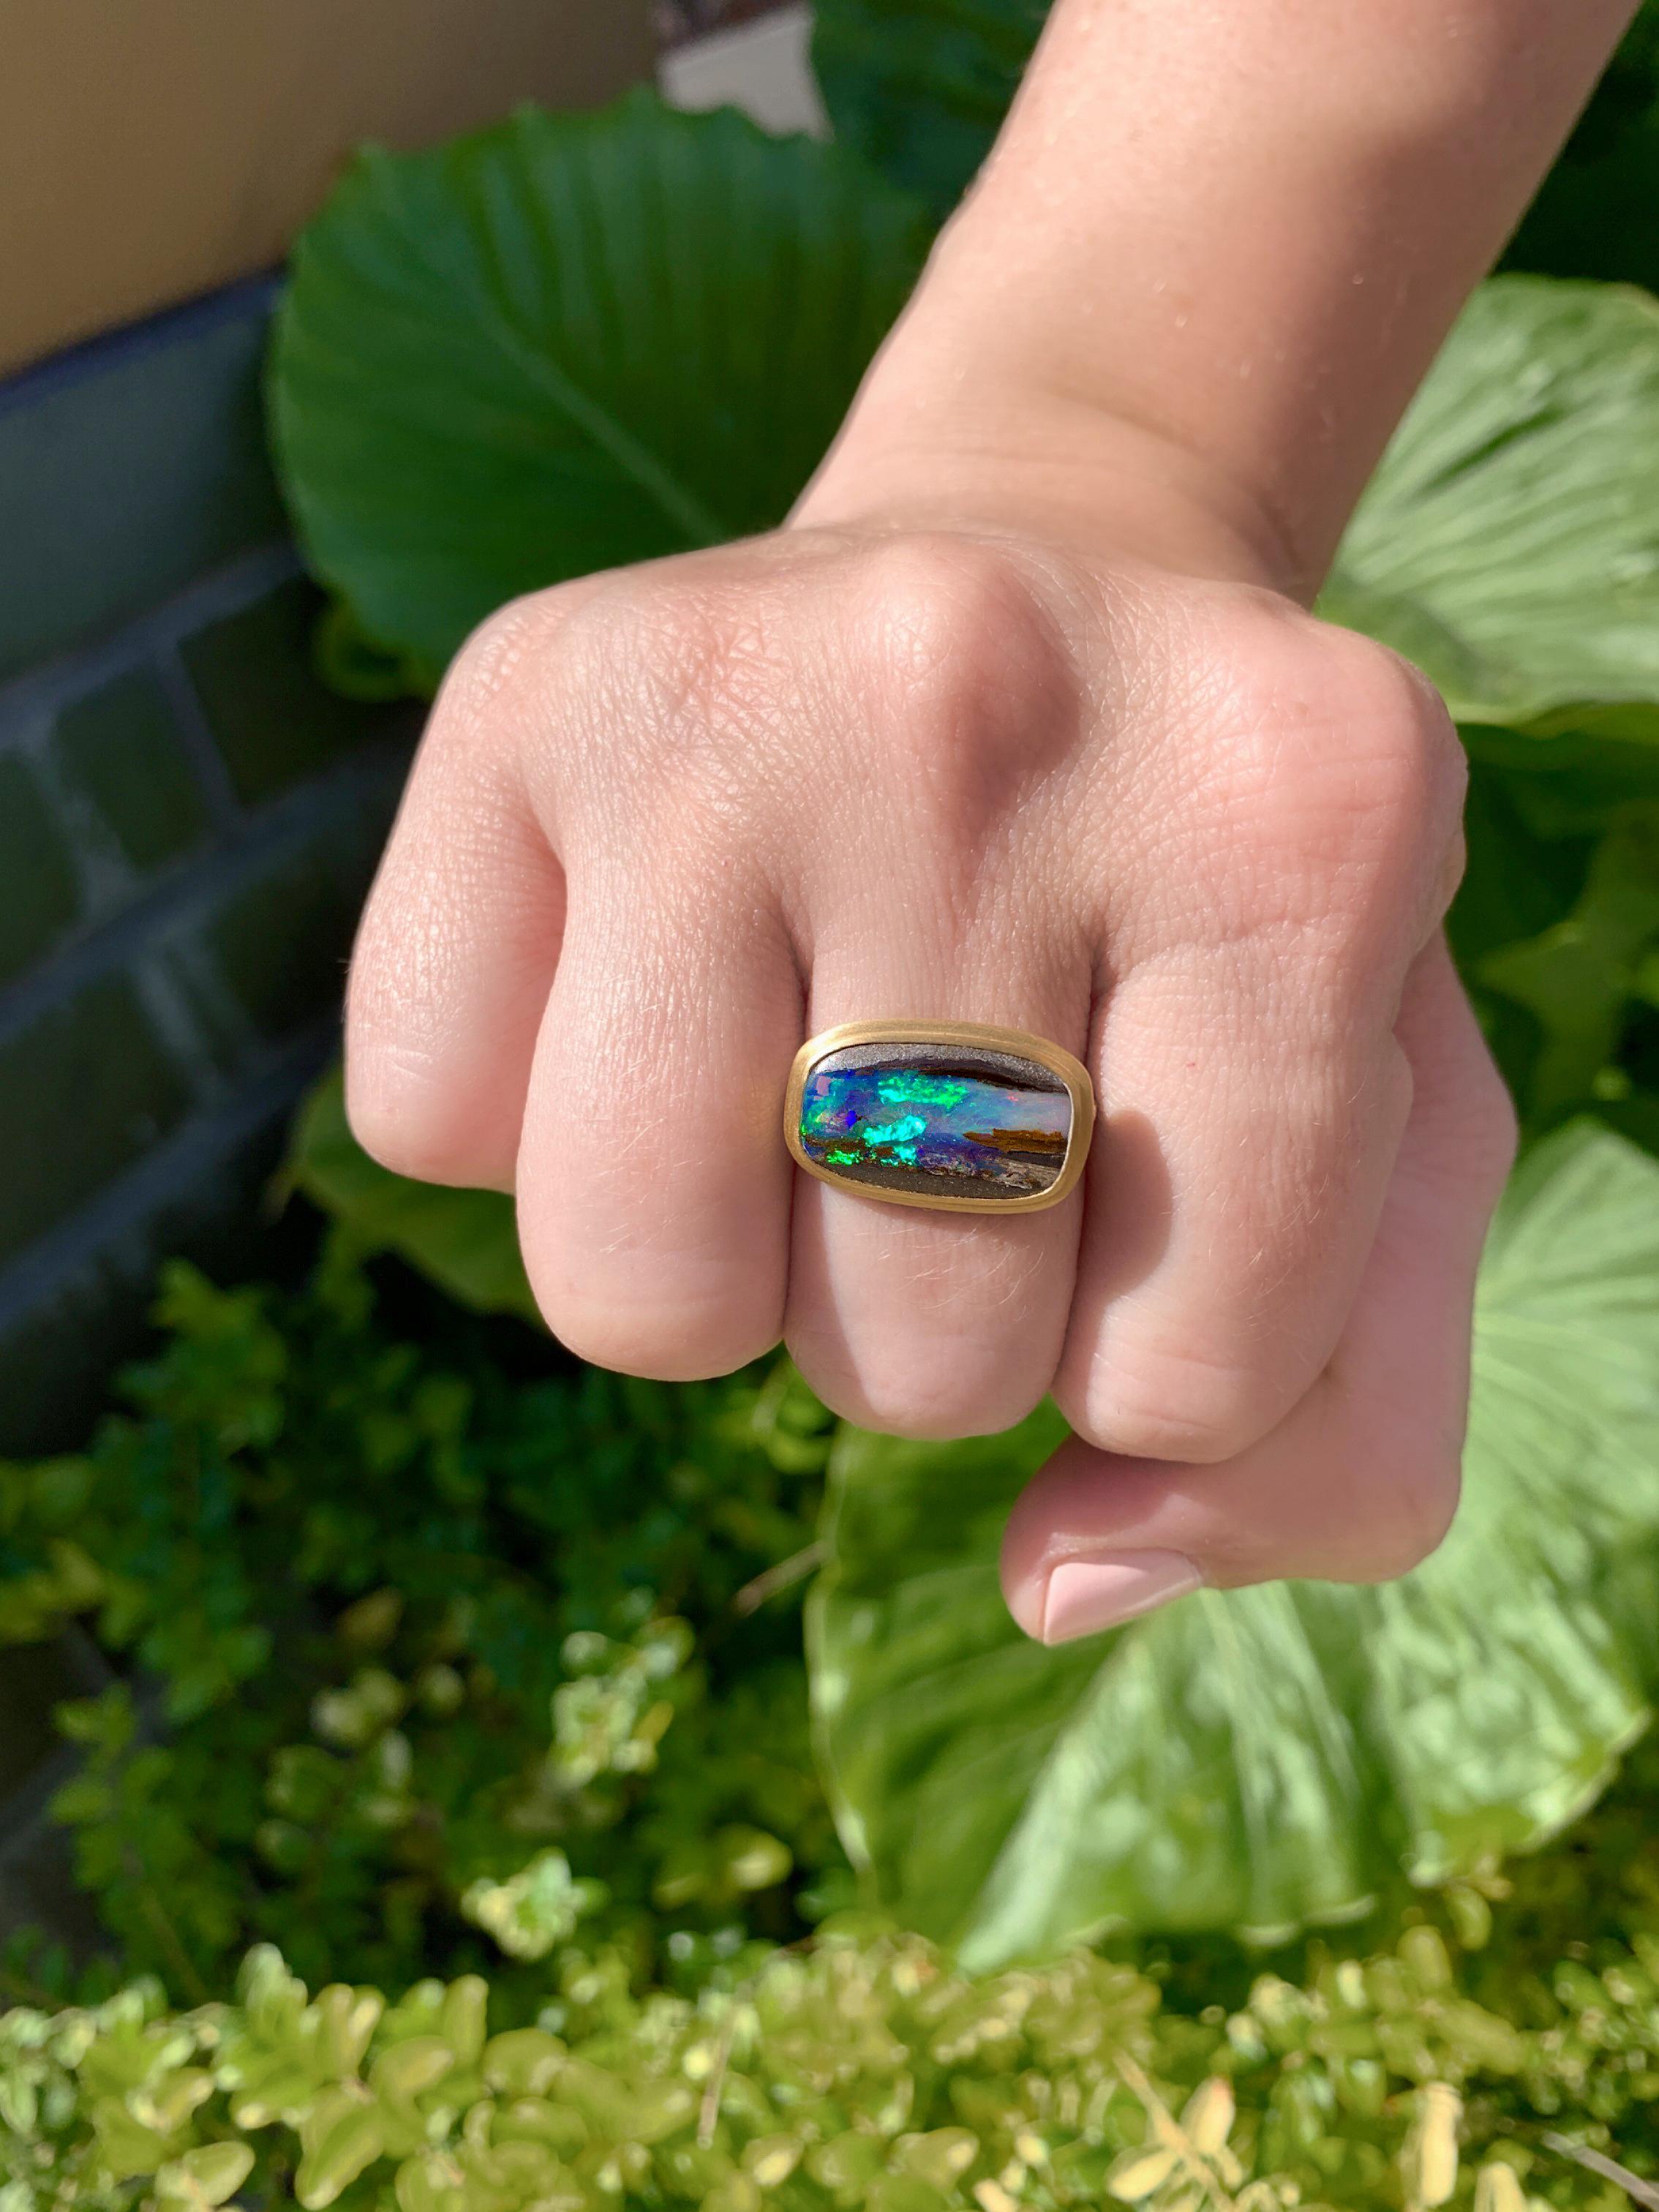 One of a Kind Editions Ring hand-fabricated in Japan by jewelry designer Shinobu Marotta (Talkative Atelier) showcasing an exceptional, rare 3.78 carat precious picture opal from the Queensland mine in Australia, framed and bezel-set in